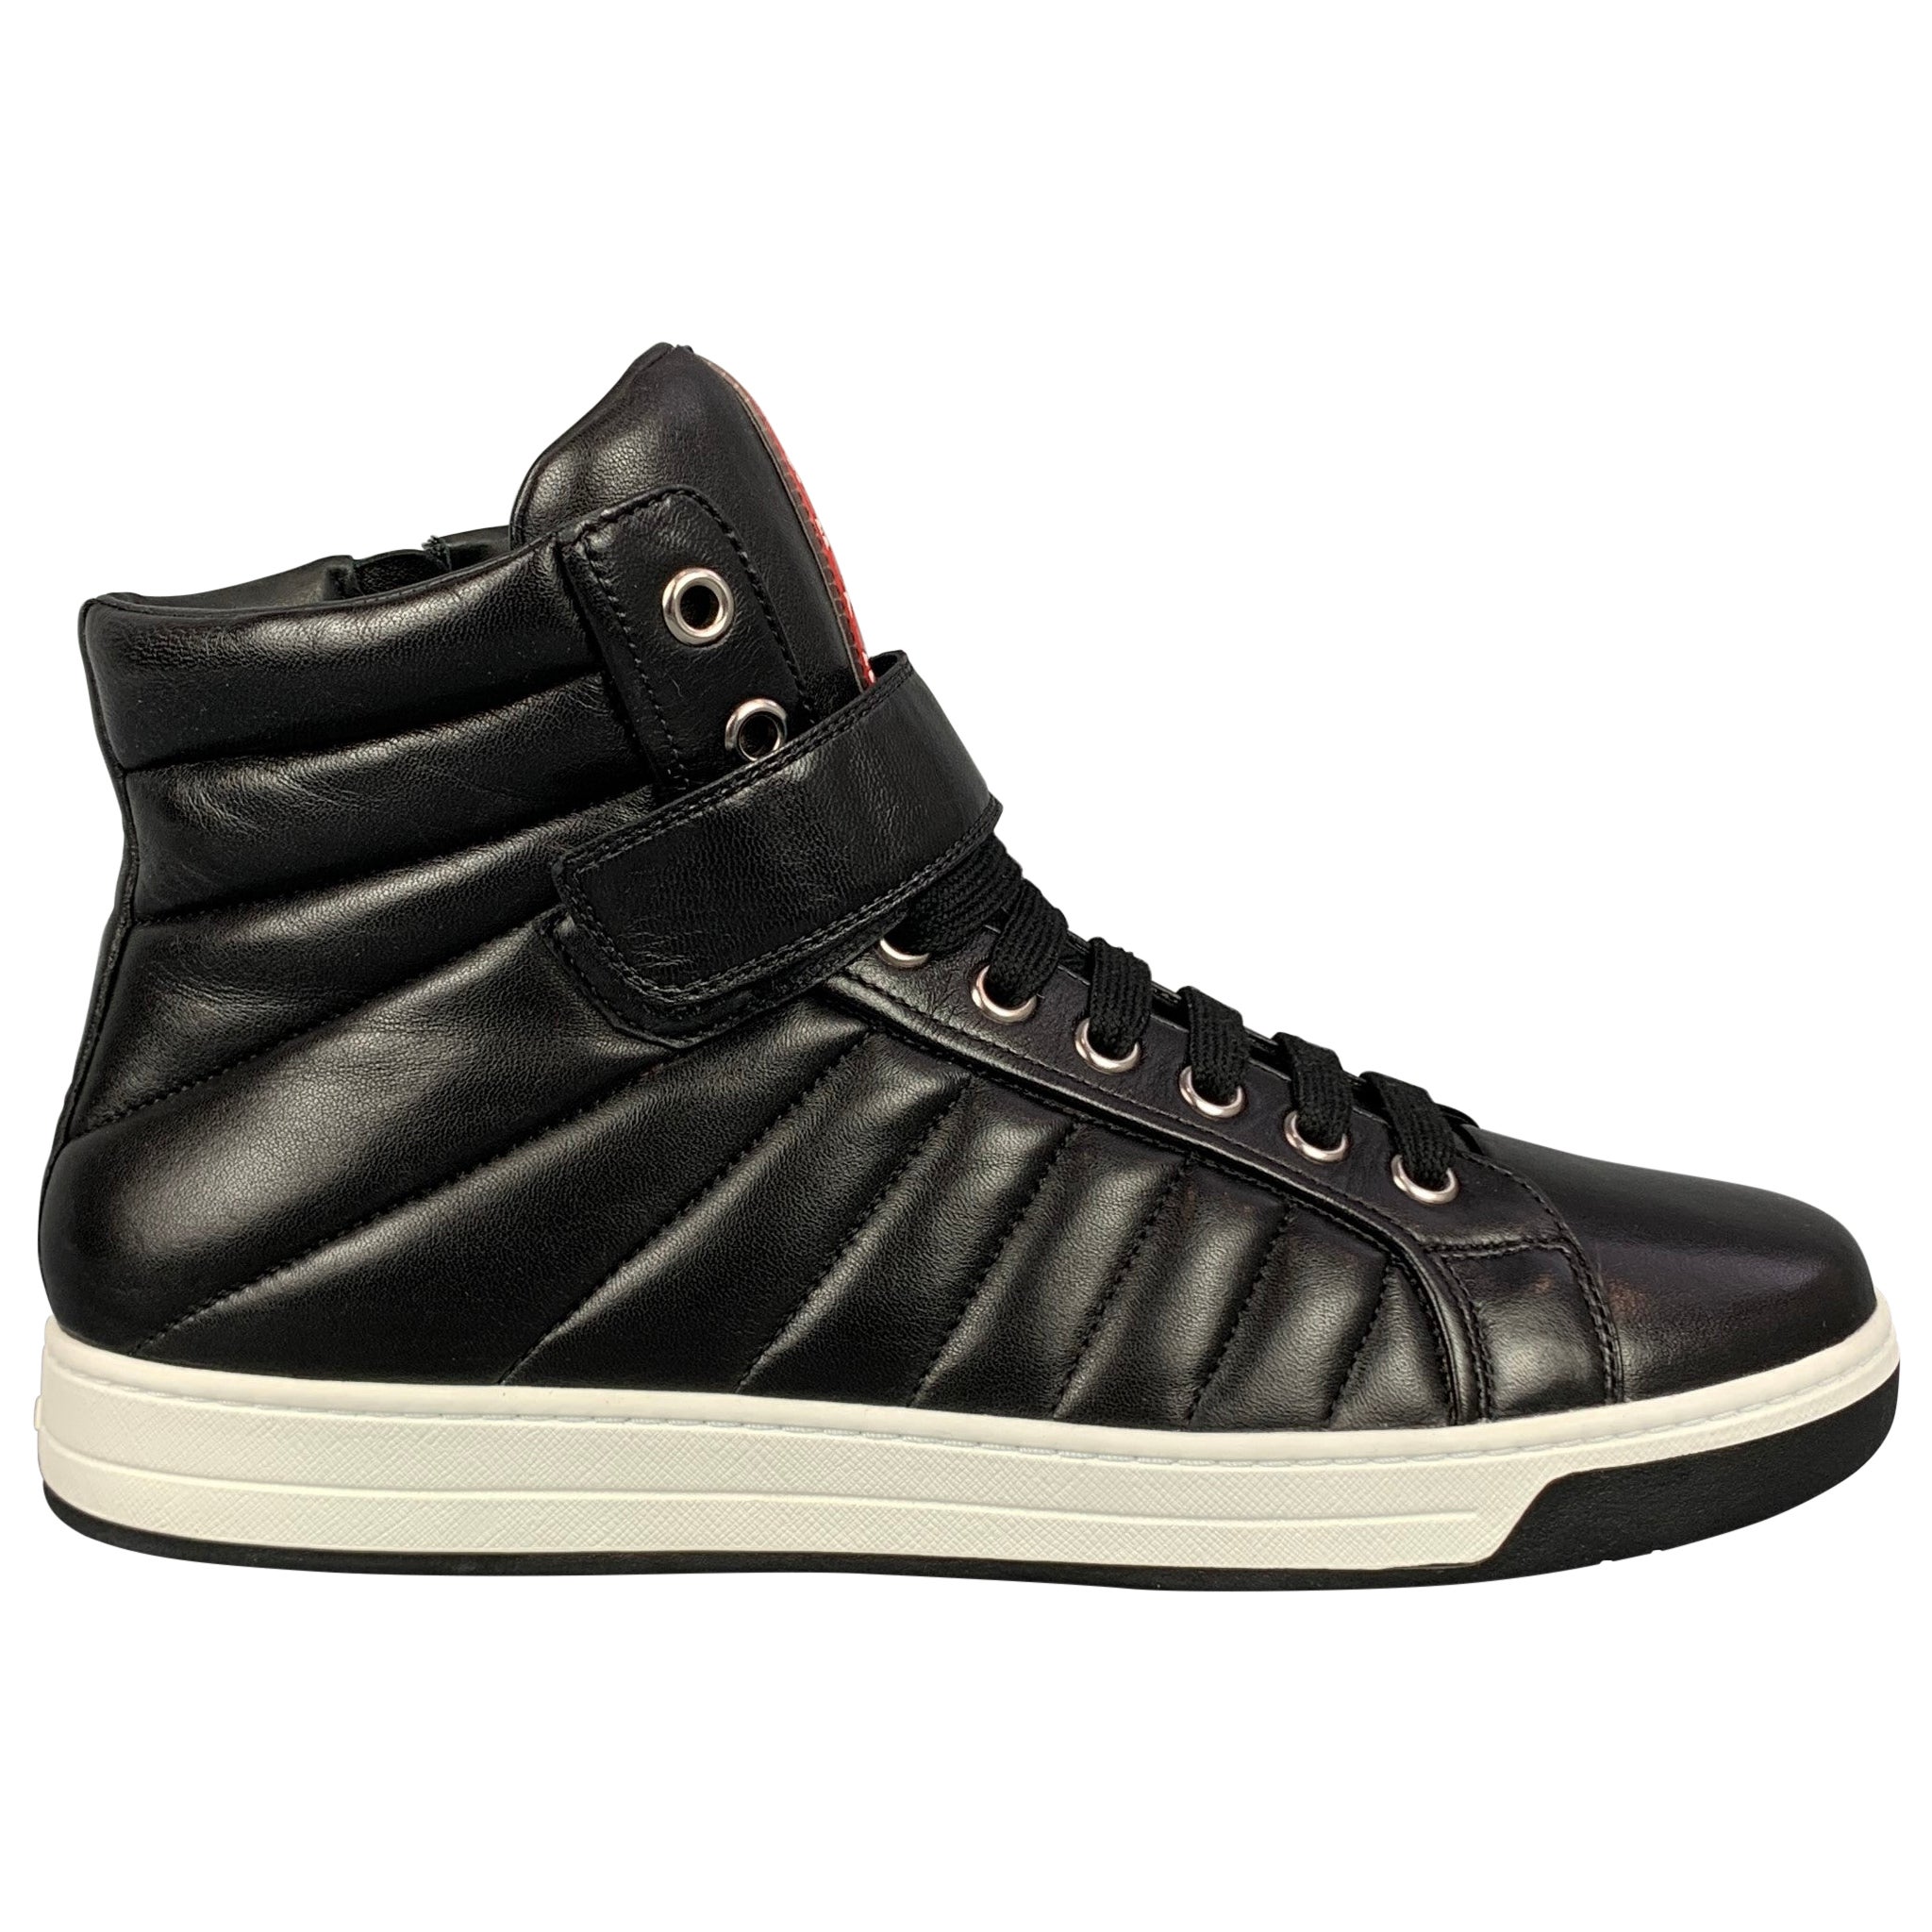 PRADA Size 10.5 Black Quilted Leather High Top Sneakers